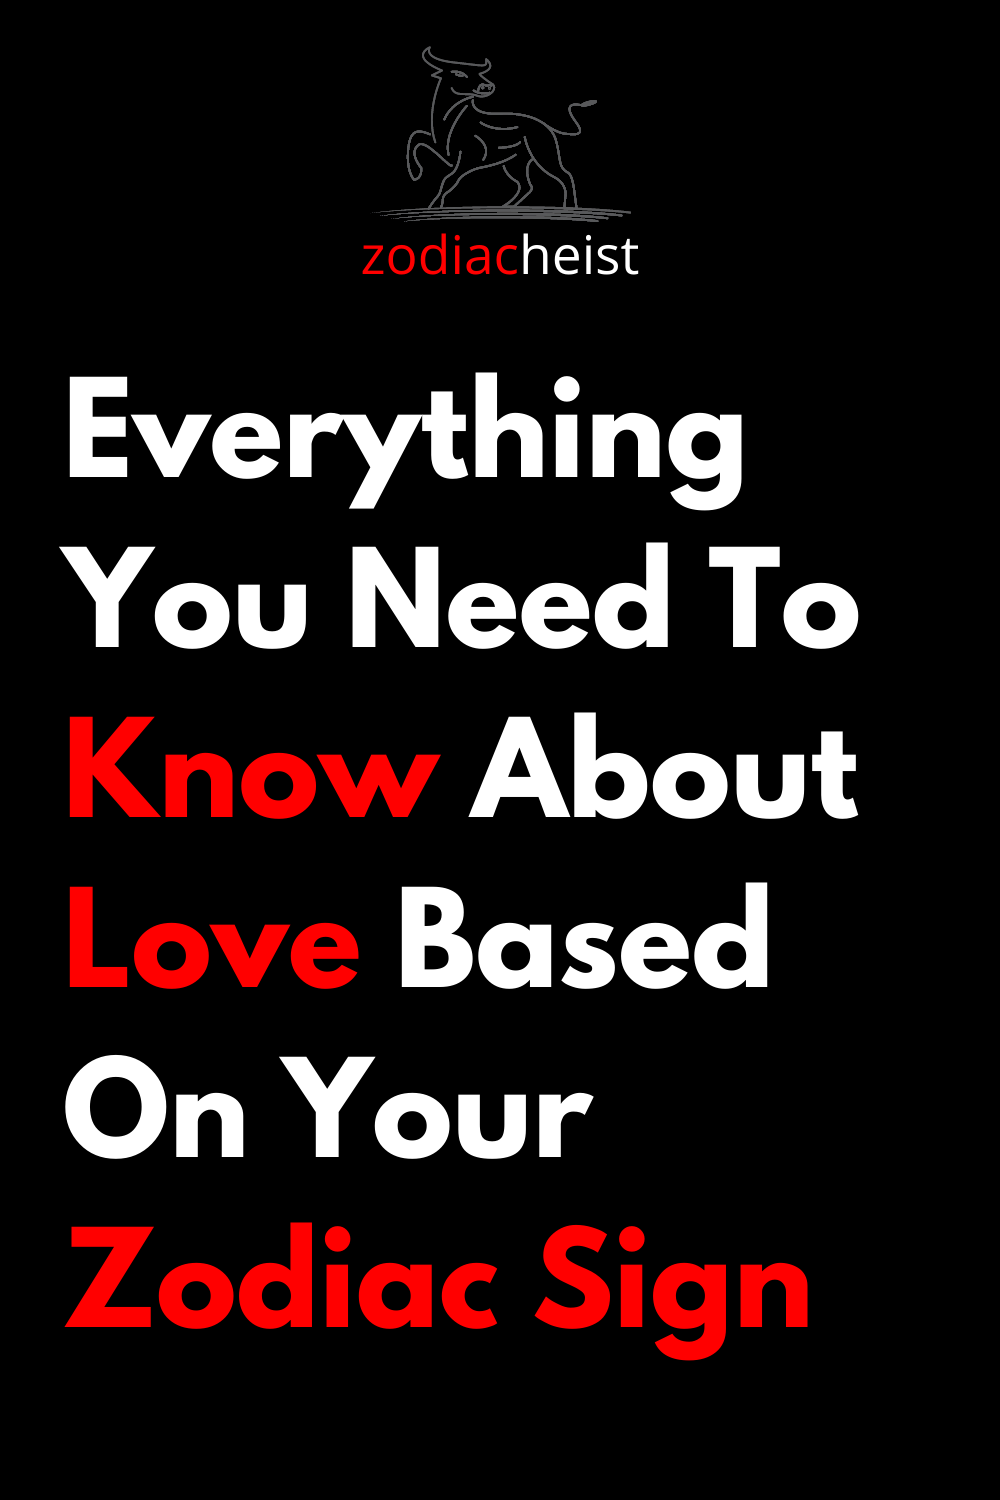 Everything You Need To Know About Love Based On Your Zodiac Sign